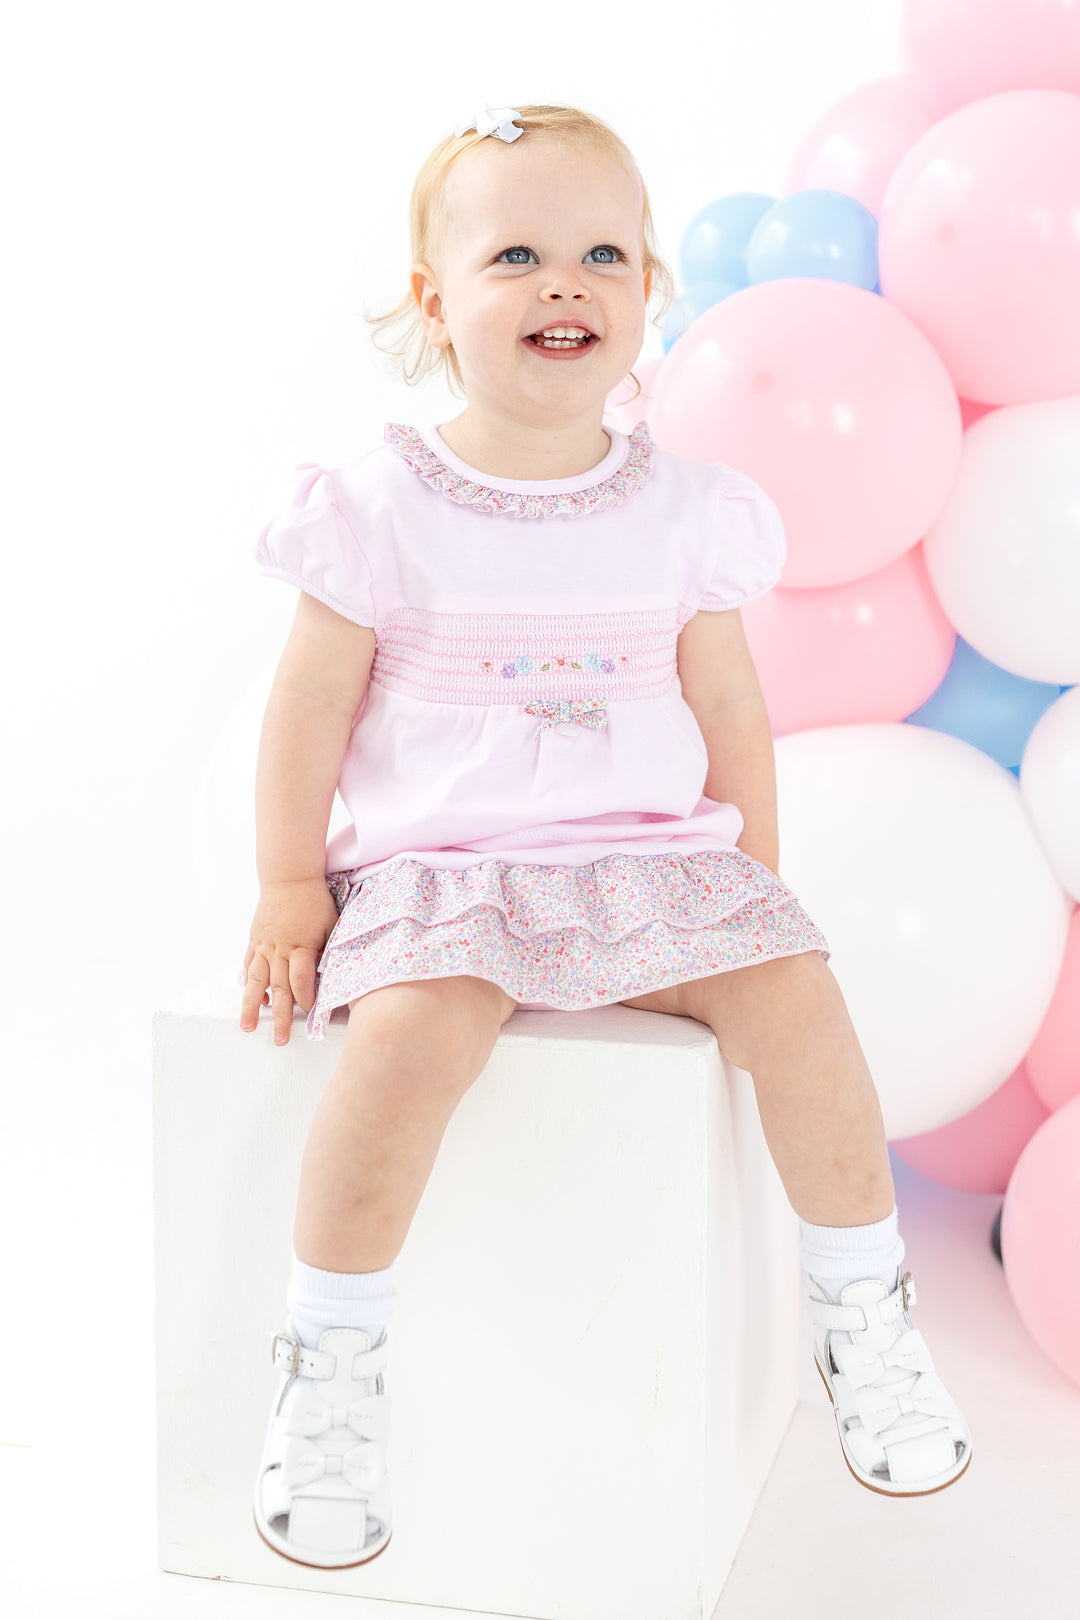 Blues Baby PREORDER "Tabitha" Pink Floral Blouse & Skirt | Millie and John